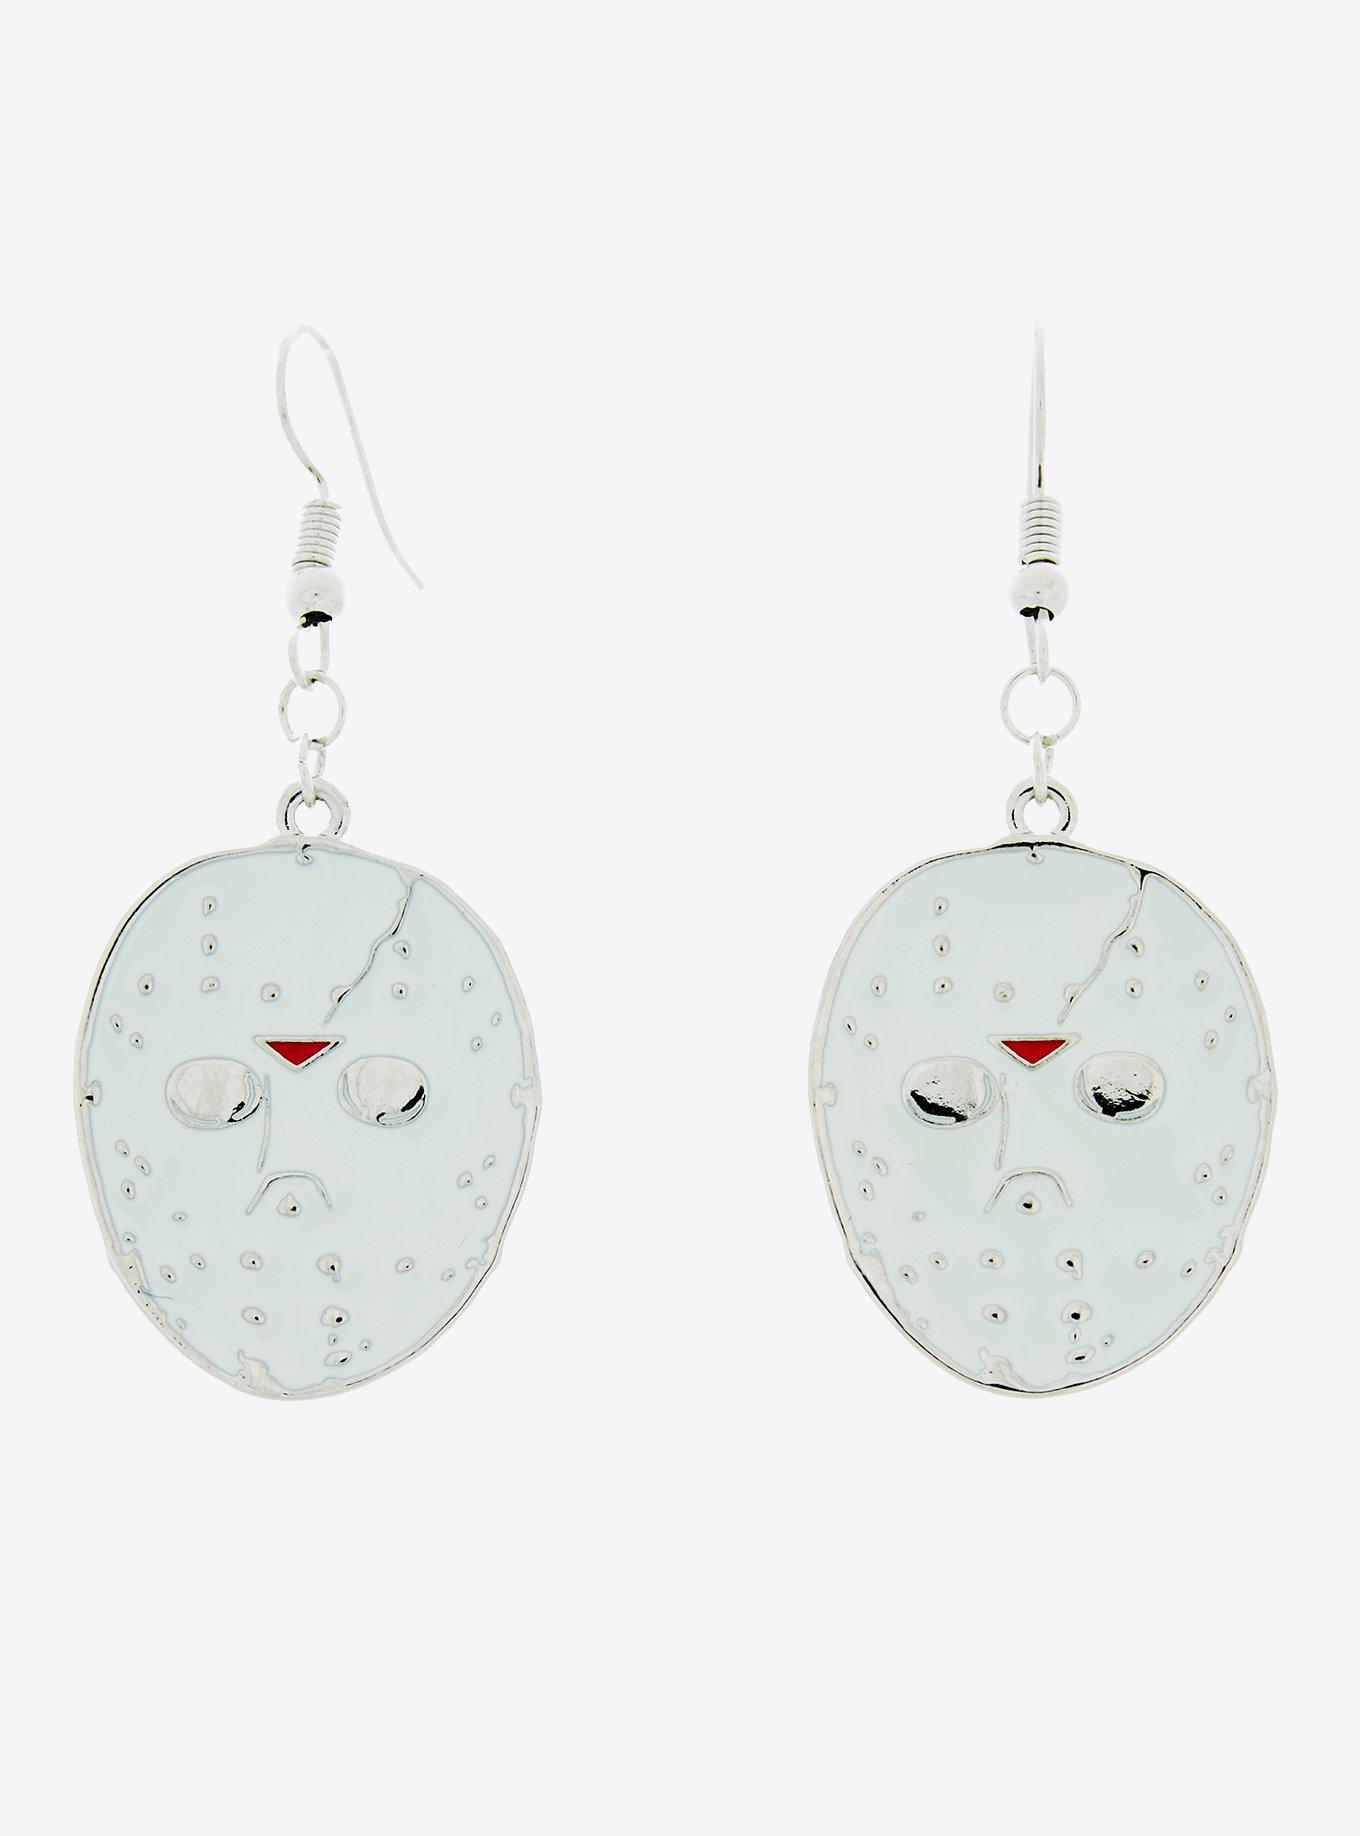 Friday the 13th Jason Voorhees Mask Earrings - BoxLunch Exclusive